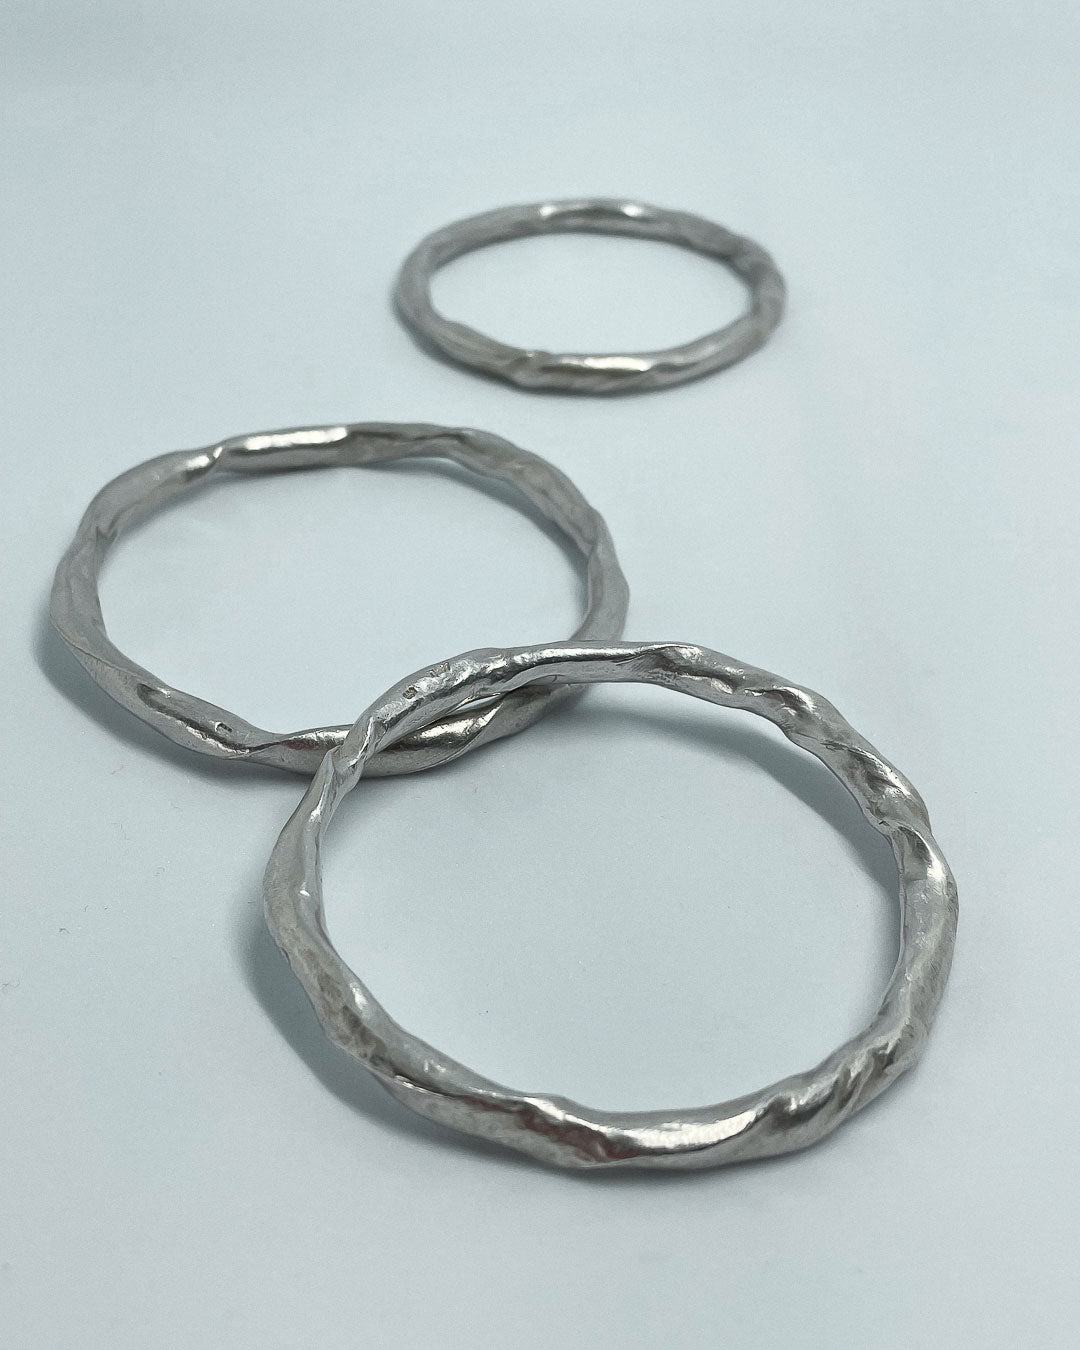 3 heavy organic round Fine Silver Bangles lying on a flat surface, two are stacked against each other